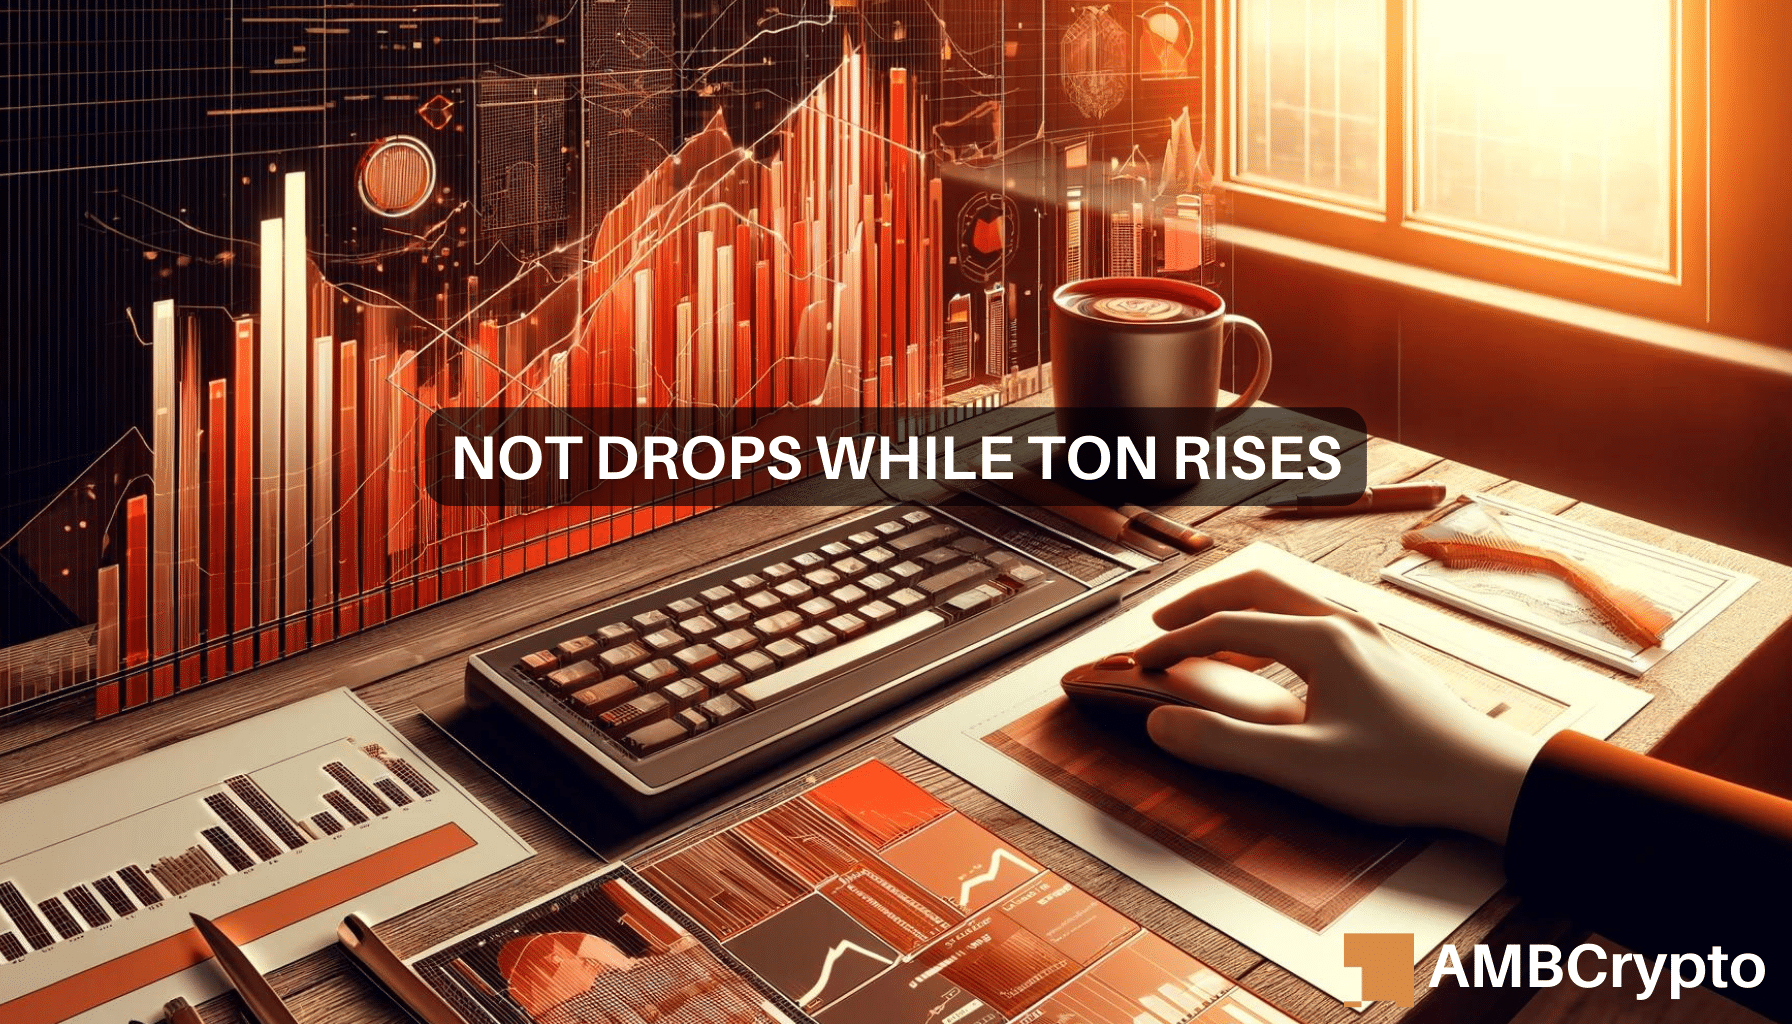 Notcoin down 55% since launch - Did Toncoin suffer as a result?